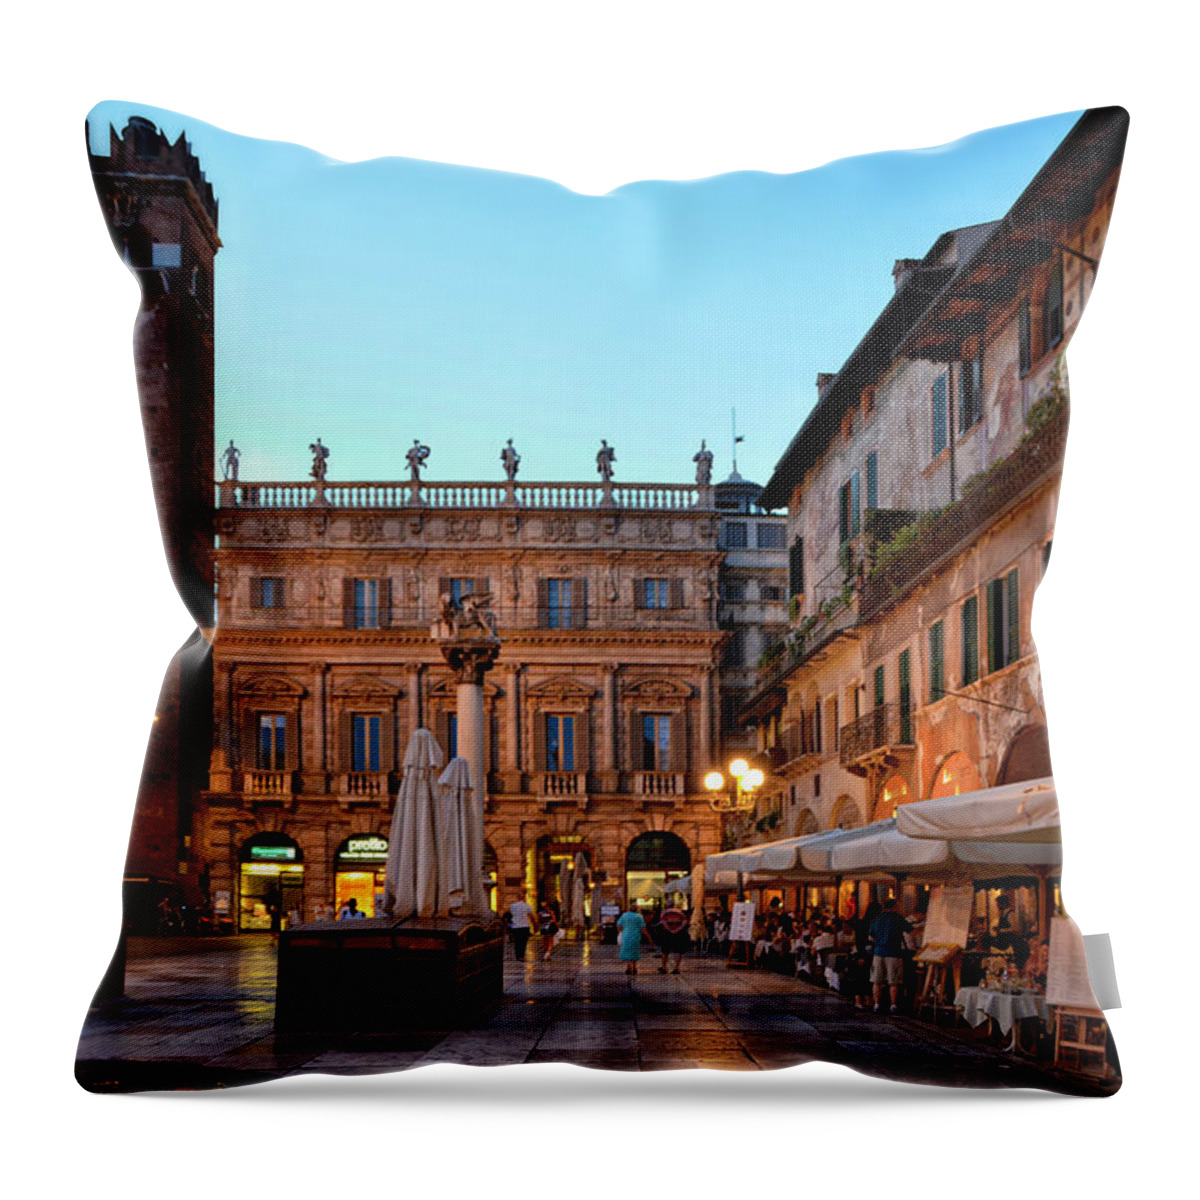 City Throw Pillow featuring the photograph Verona - Piazza Delle Erbe by Joachim G Pinkawa